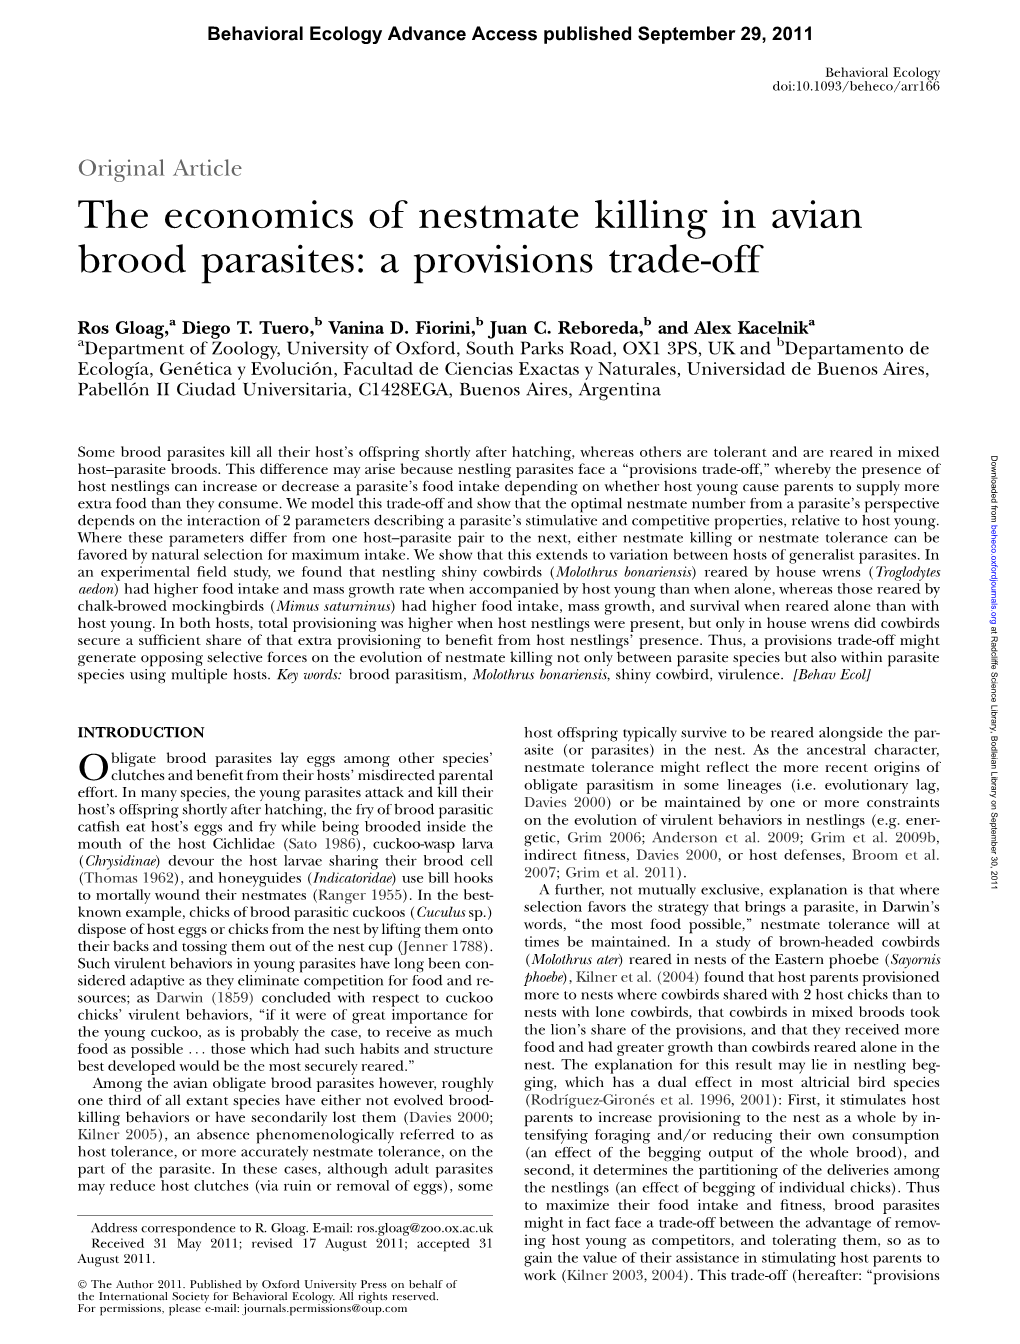 The Economics of Nestmate Killing in Avian Brood Parasites: a Provisions Trade-Off